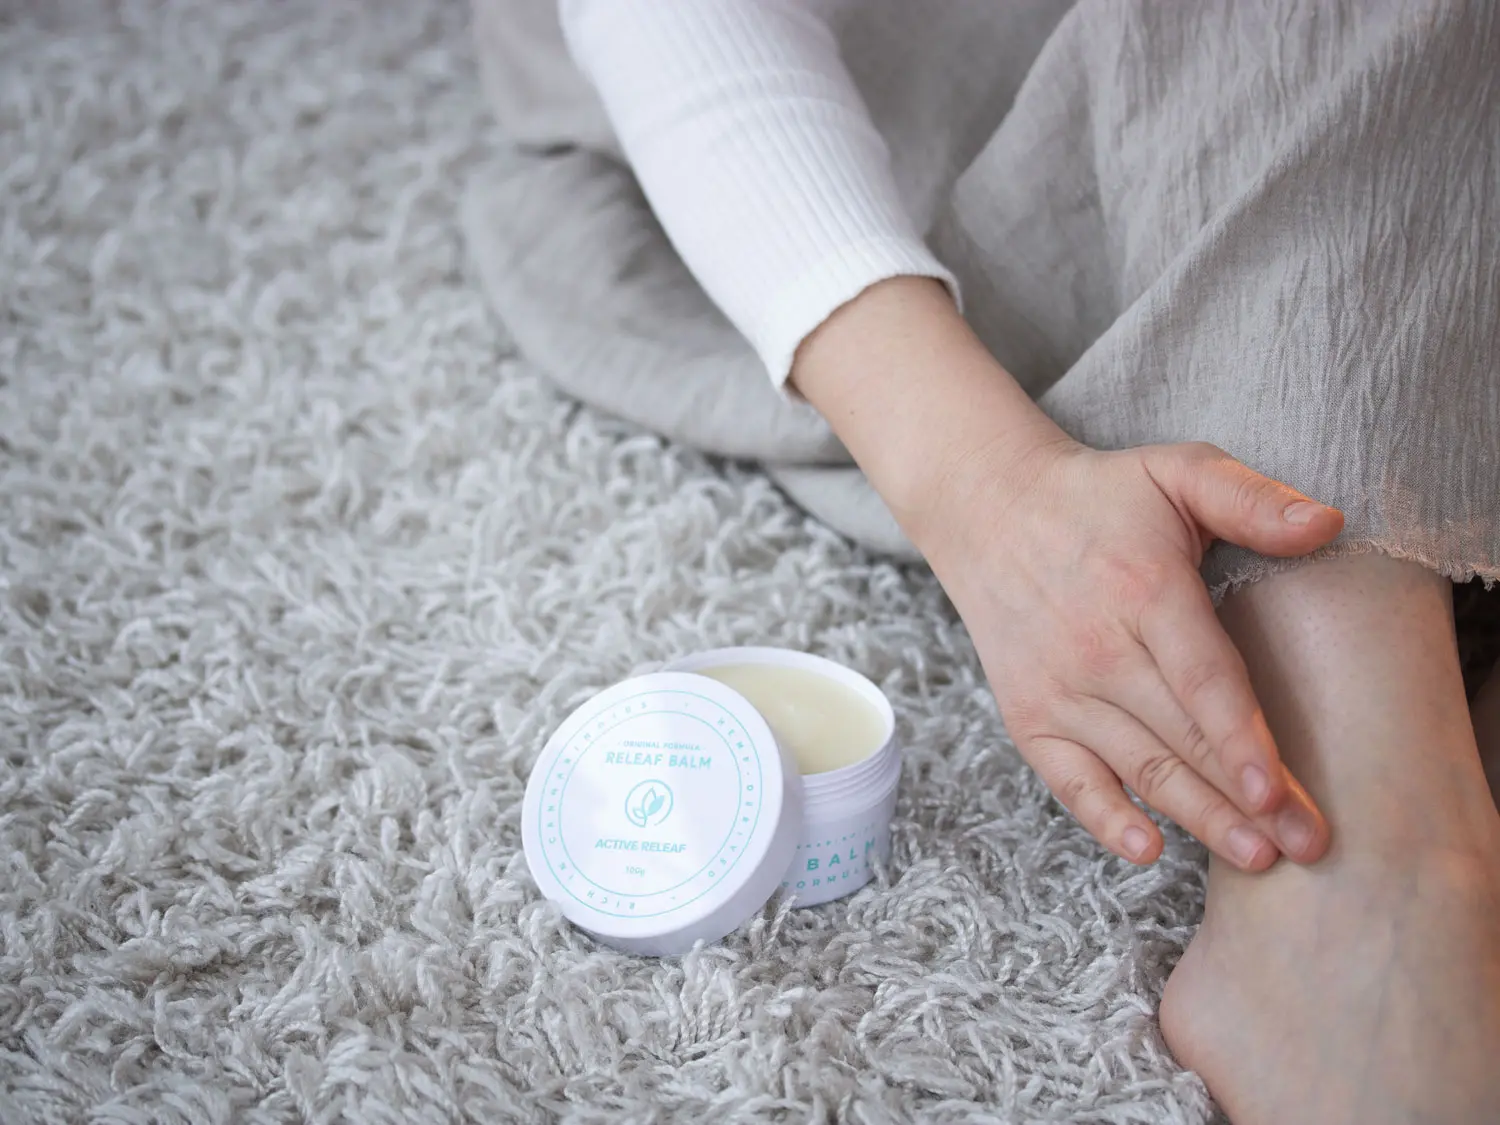 Active Releaf CBD Cream Balm in Canada Applied to Ankles